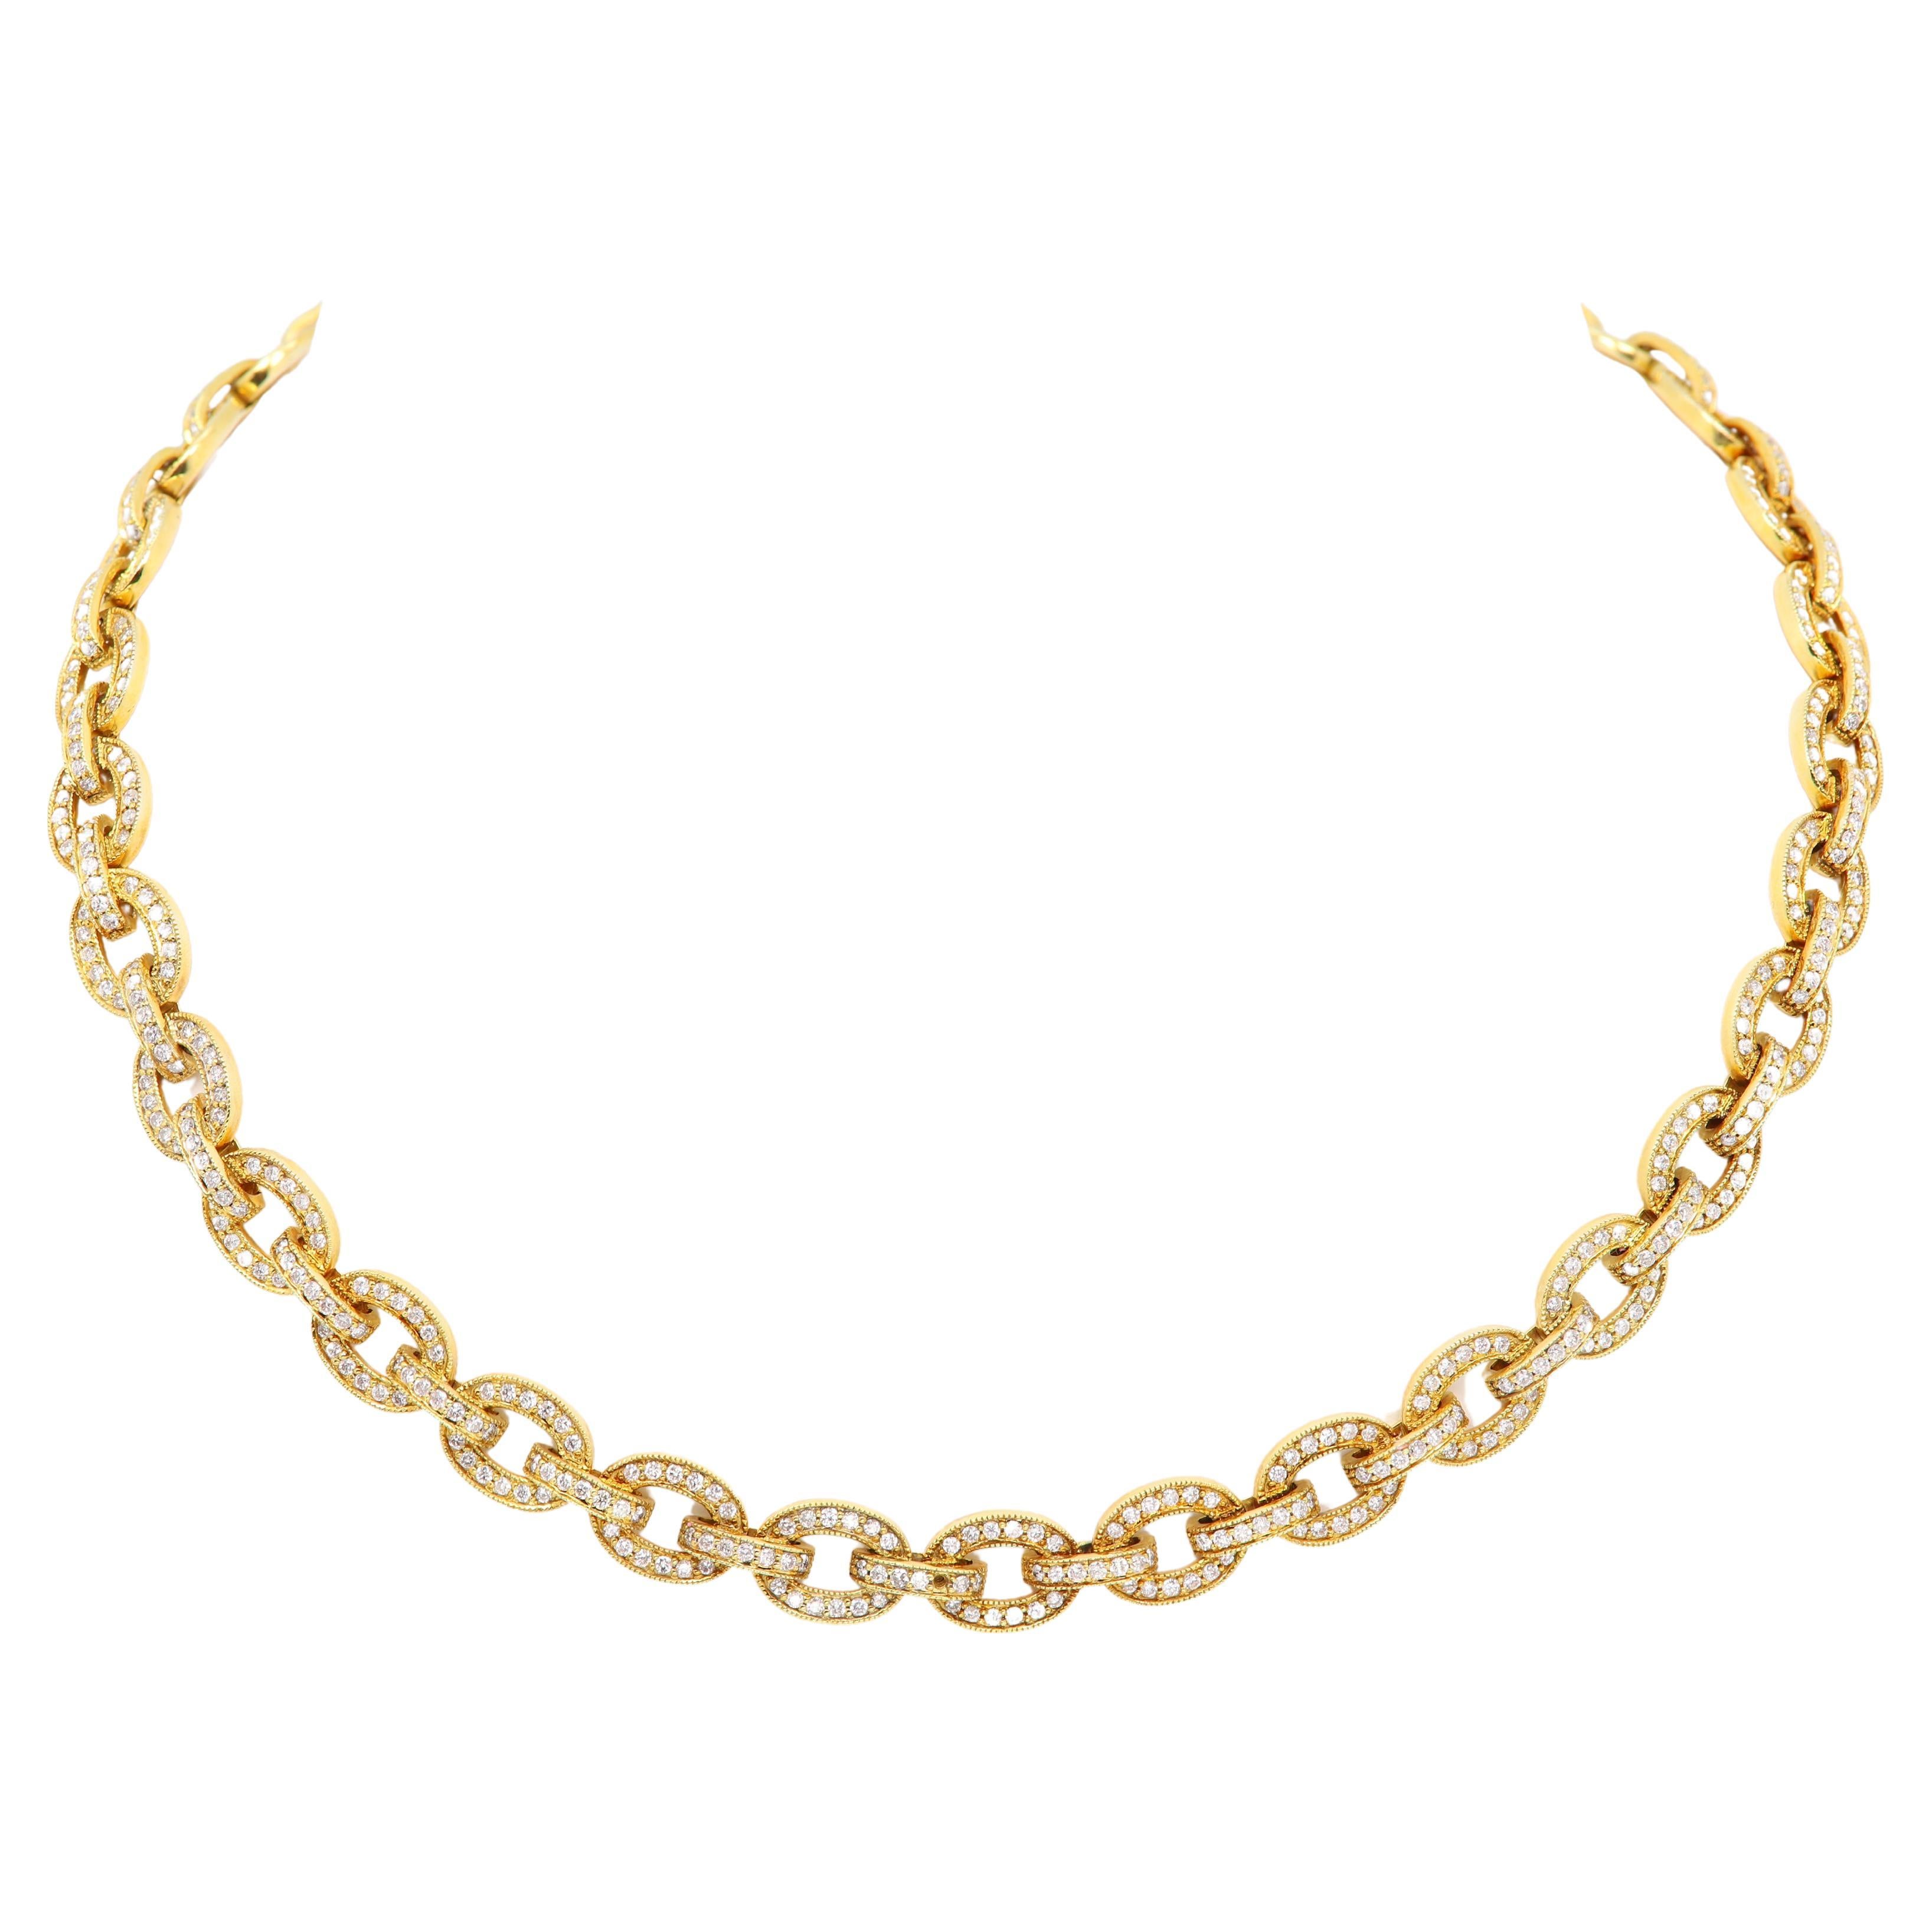 Fancy Necklace Natural Diamond Necklace 14 Karat Yellow Gold Link Chain For Sale